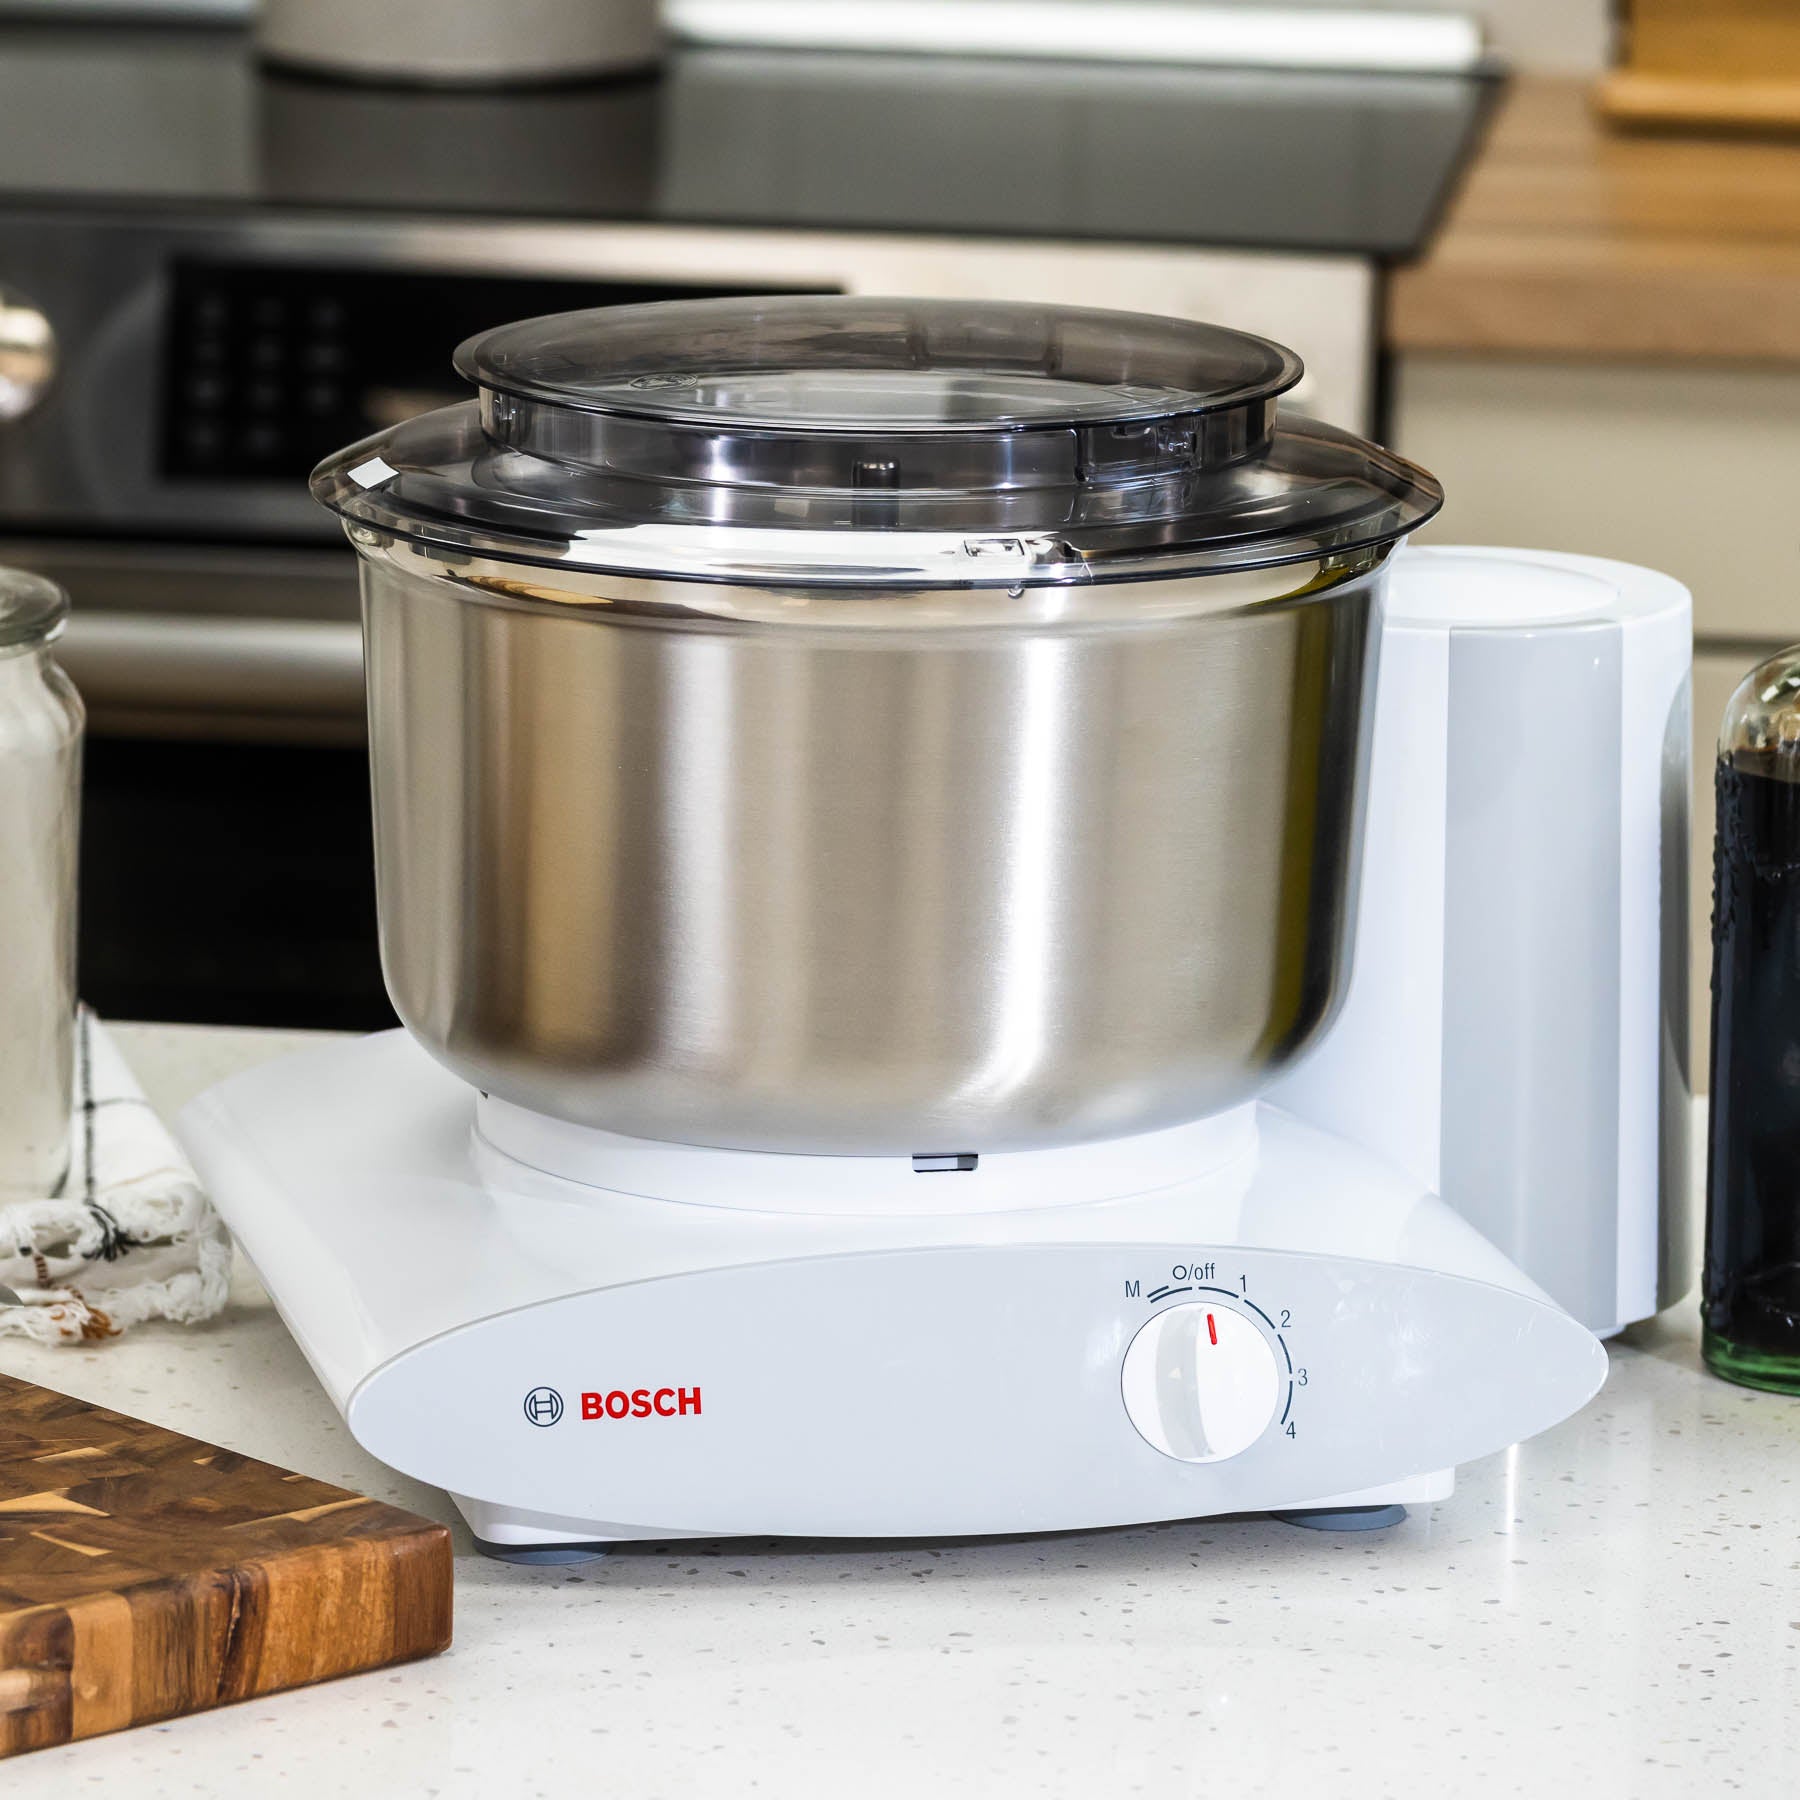 Bosch Universal Plus Mixer with stainless steel bowl for challah